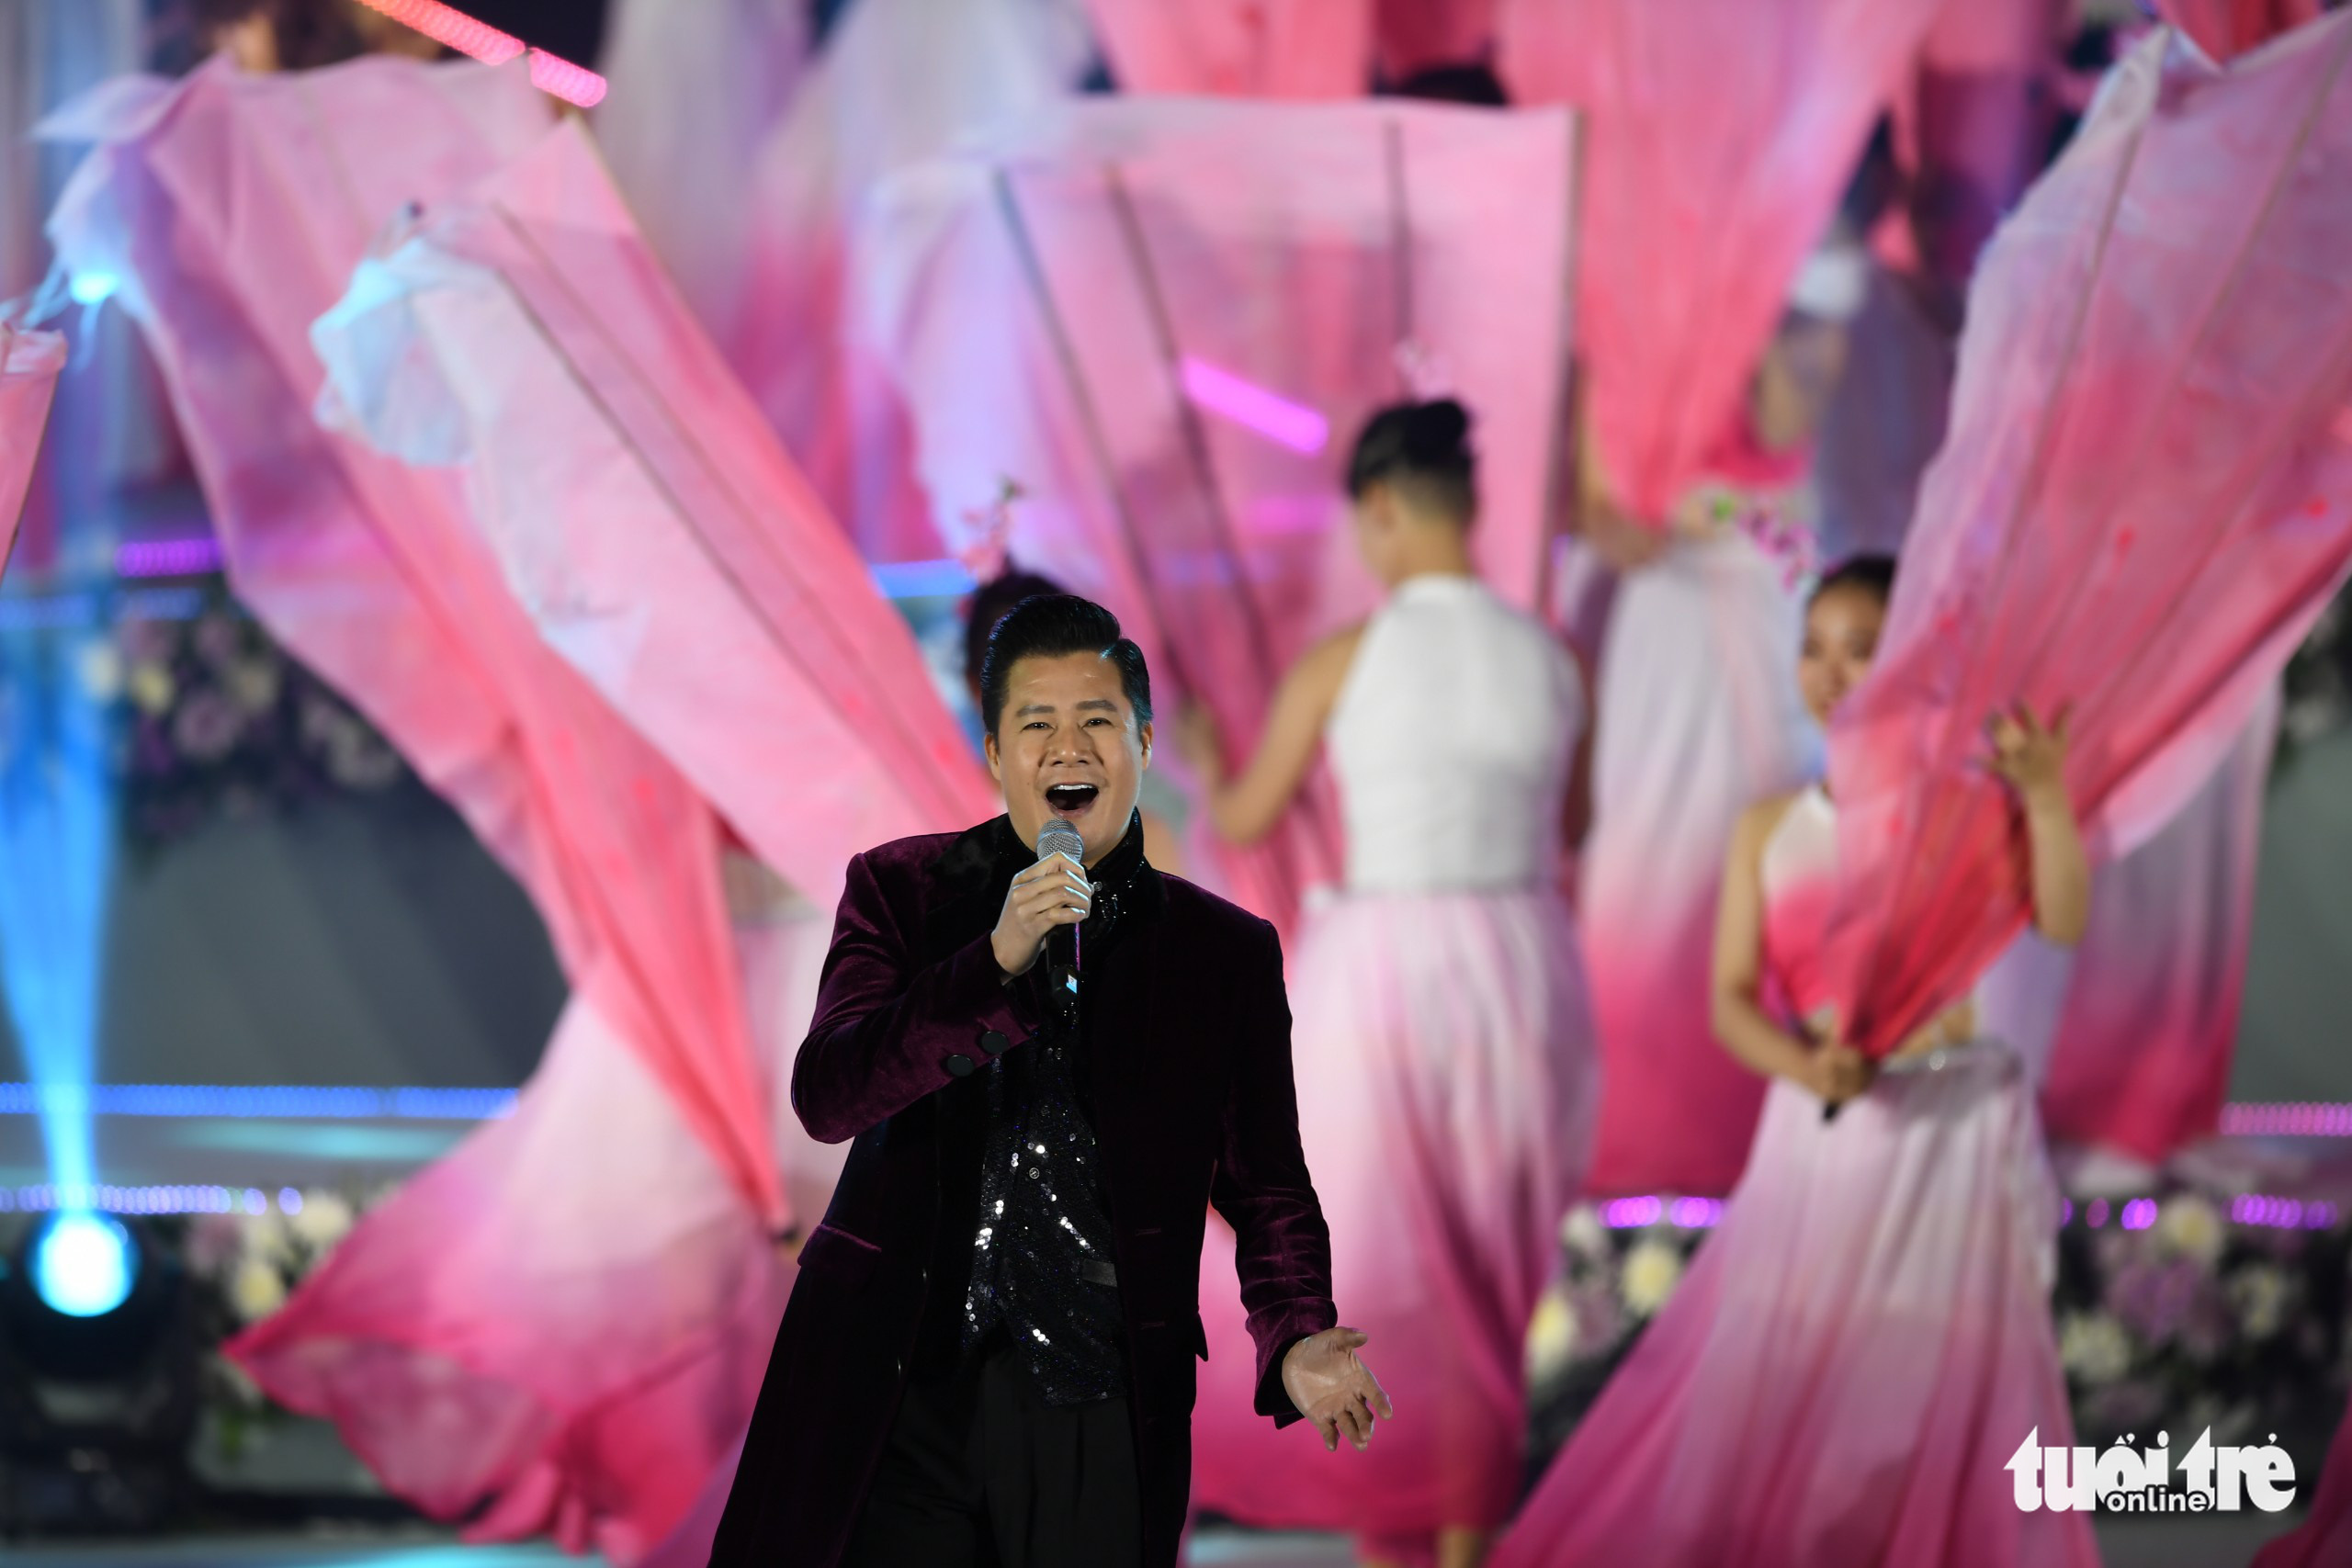 Singer Quang Dung performs at the opening ceremony of the Da Lat Flower Festival 2022 in Da Lat City, Lam Dong Province, Vietnam, December 18, 2022. Photo: M.V. / Tuoi Tre